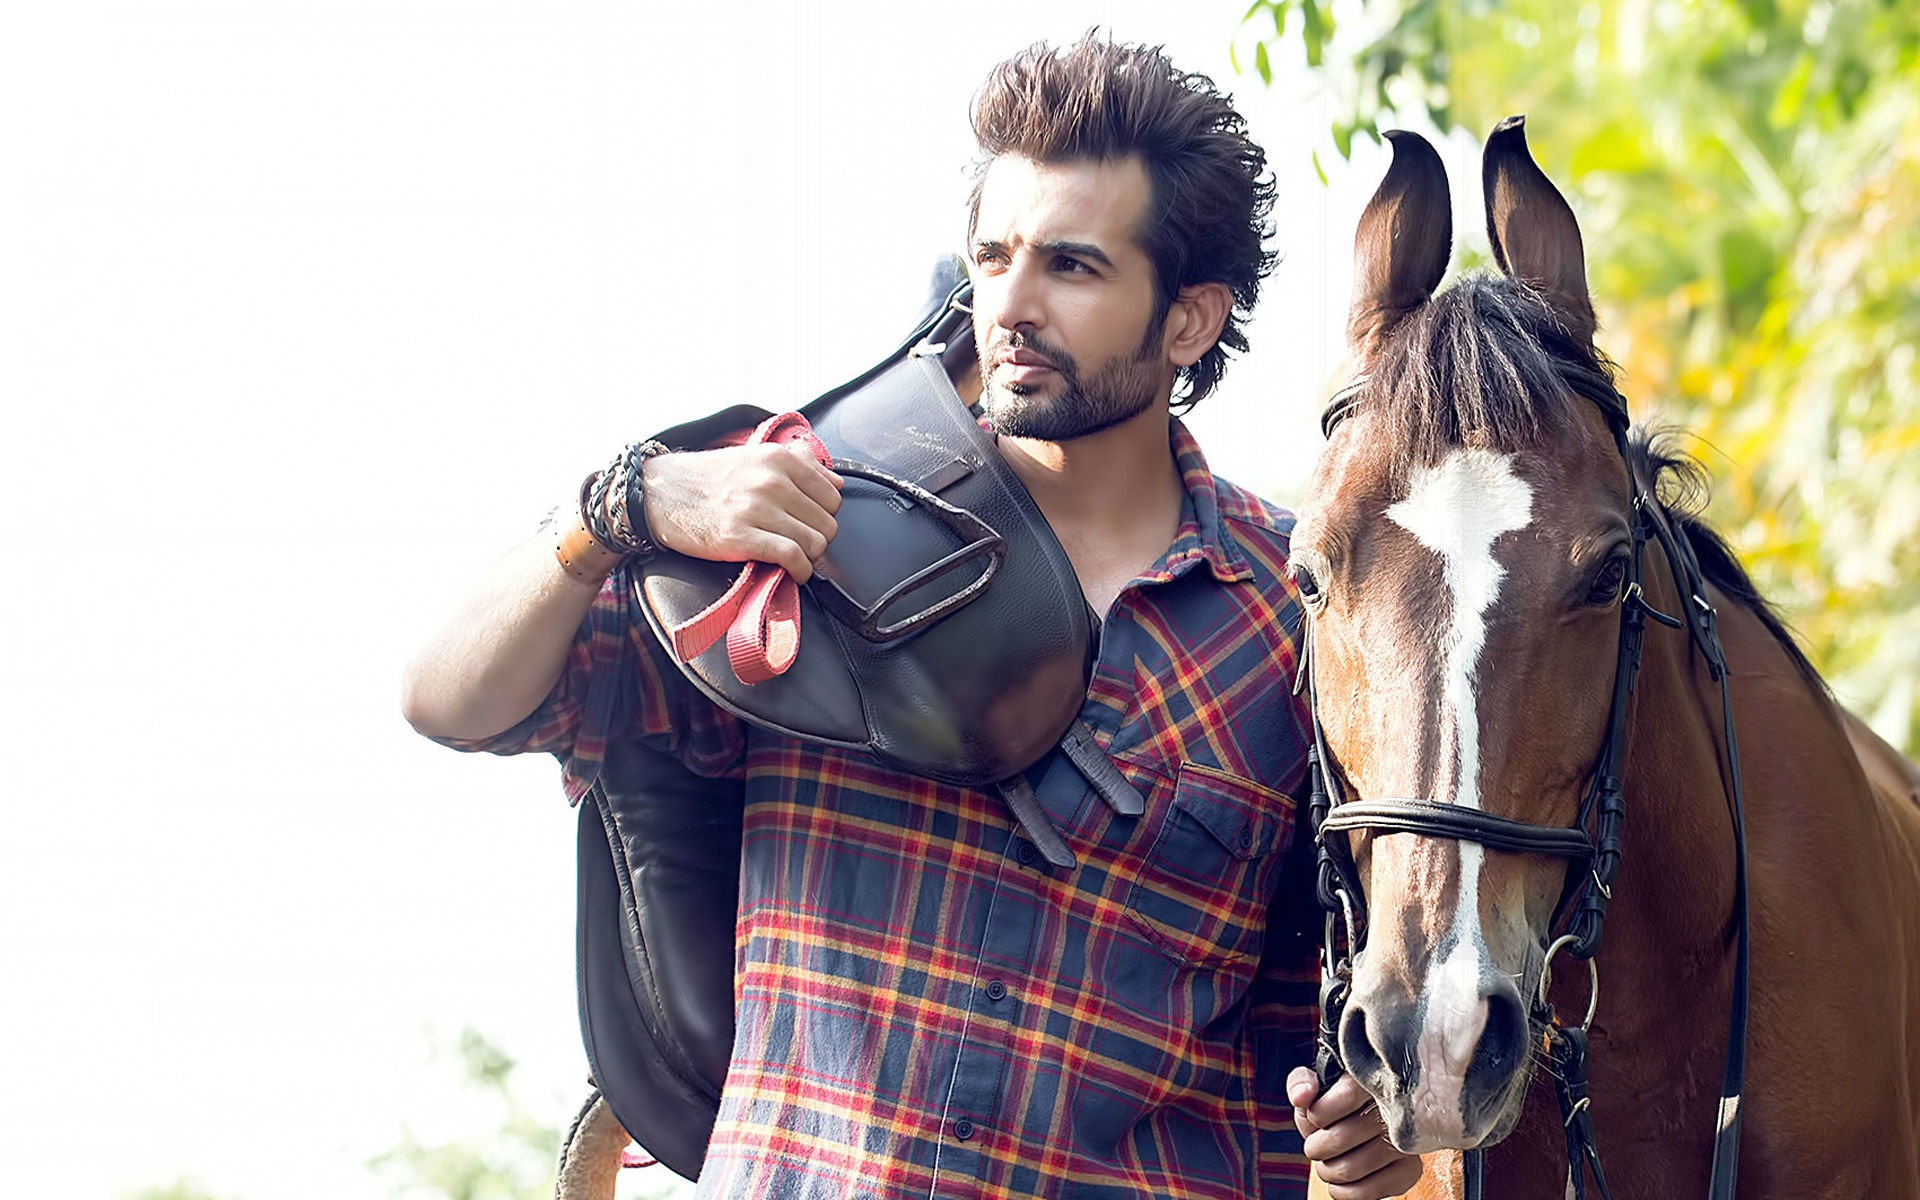 Jay Bhanushali will be seen in a movie titled